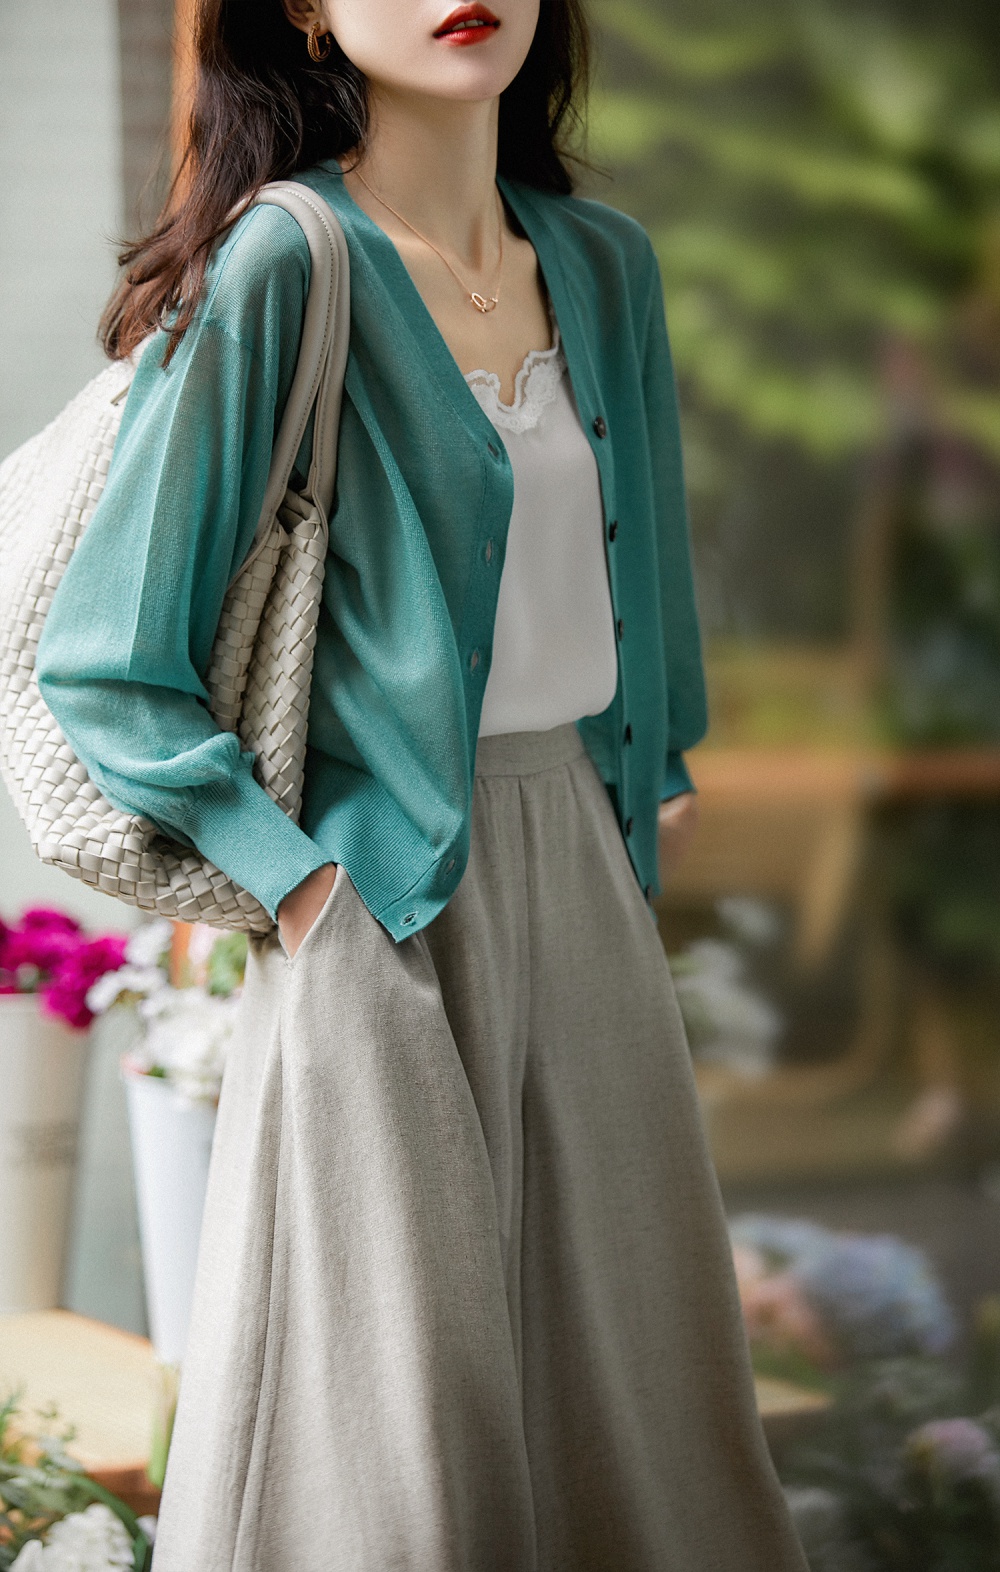 V-neck breathable autumn and winter sweater summer light cardigan